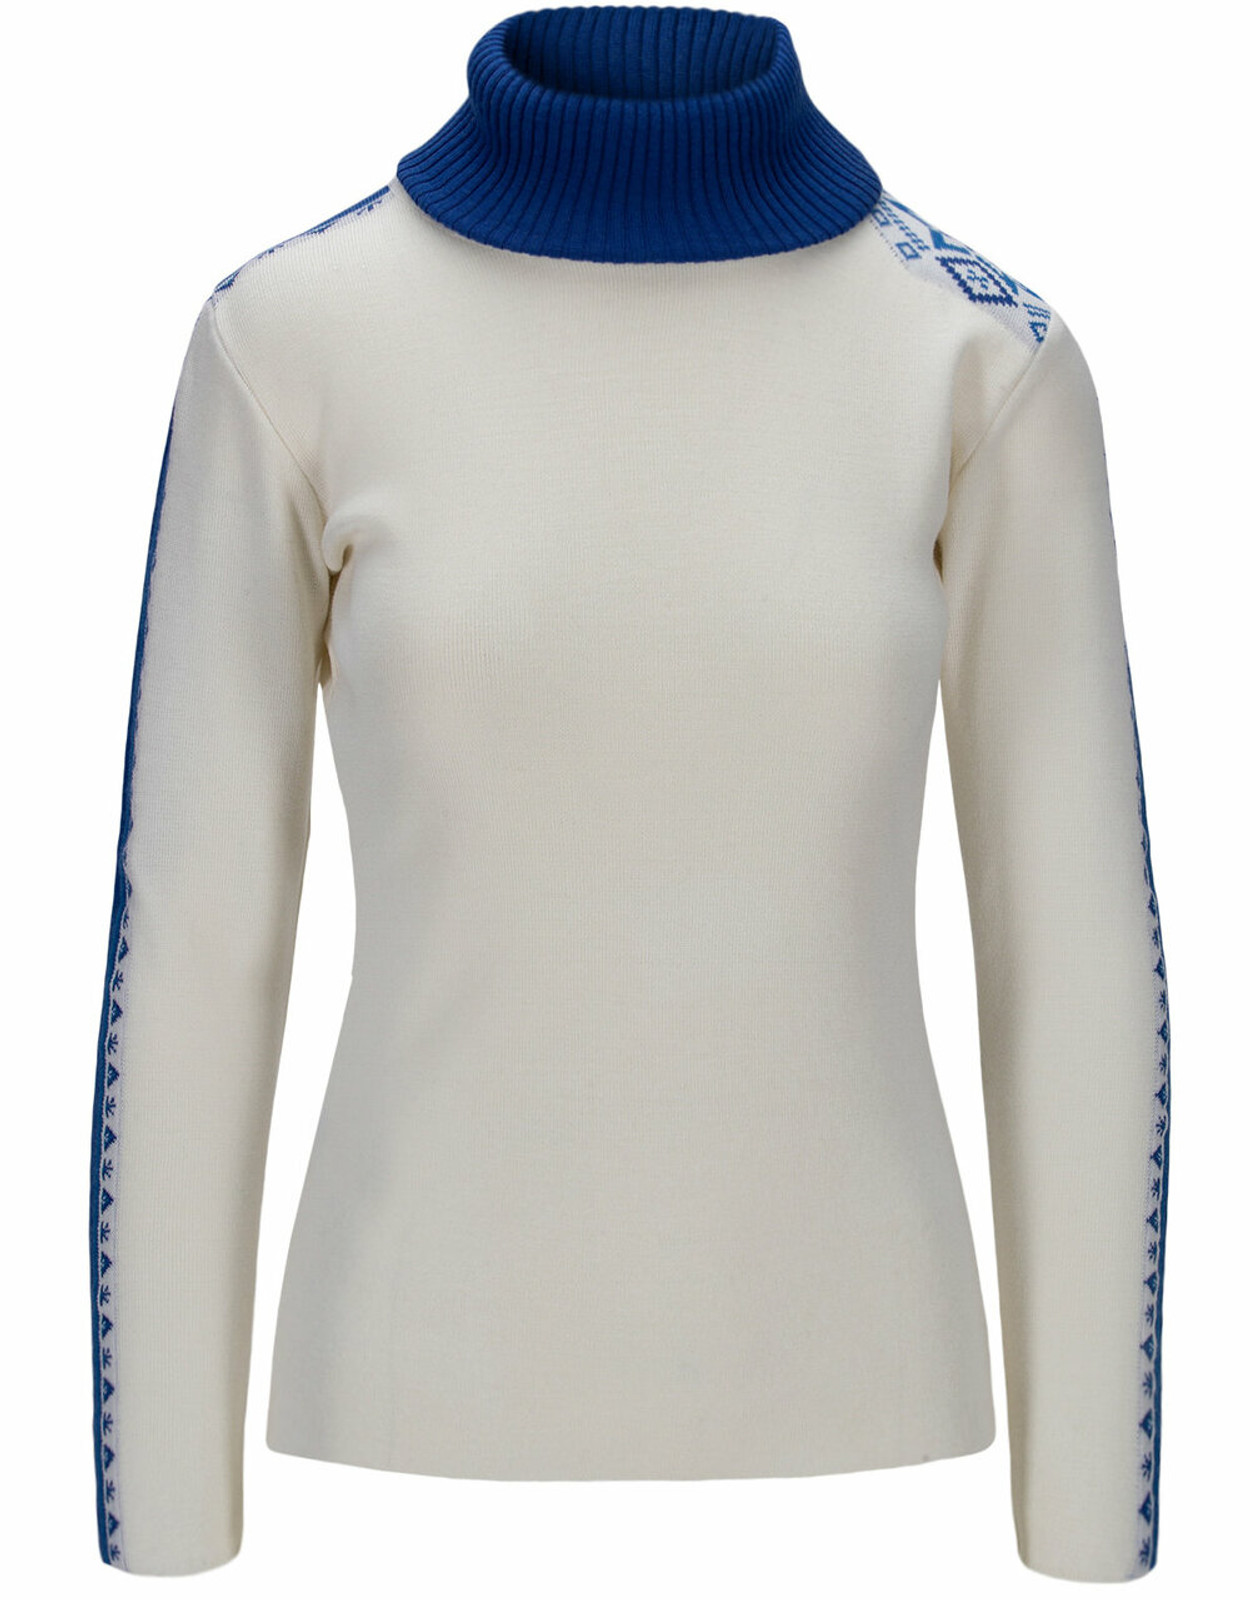 Dale of Norway Mount Aire Women's Sweater A - Ultramarine/Cobalt